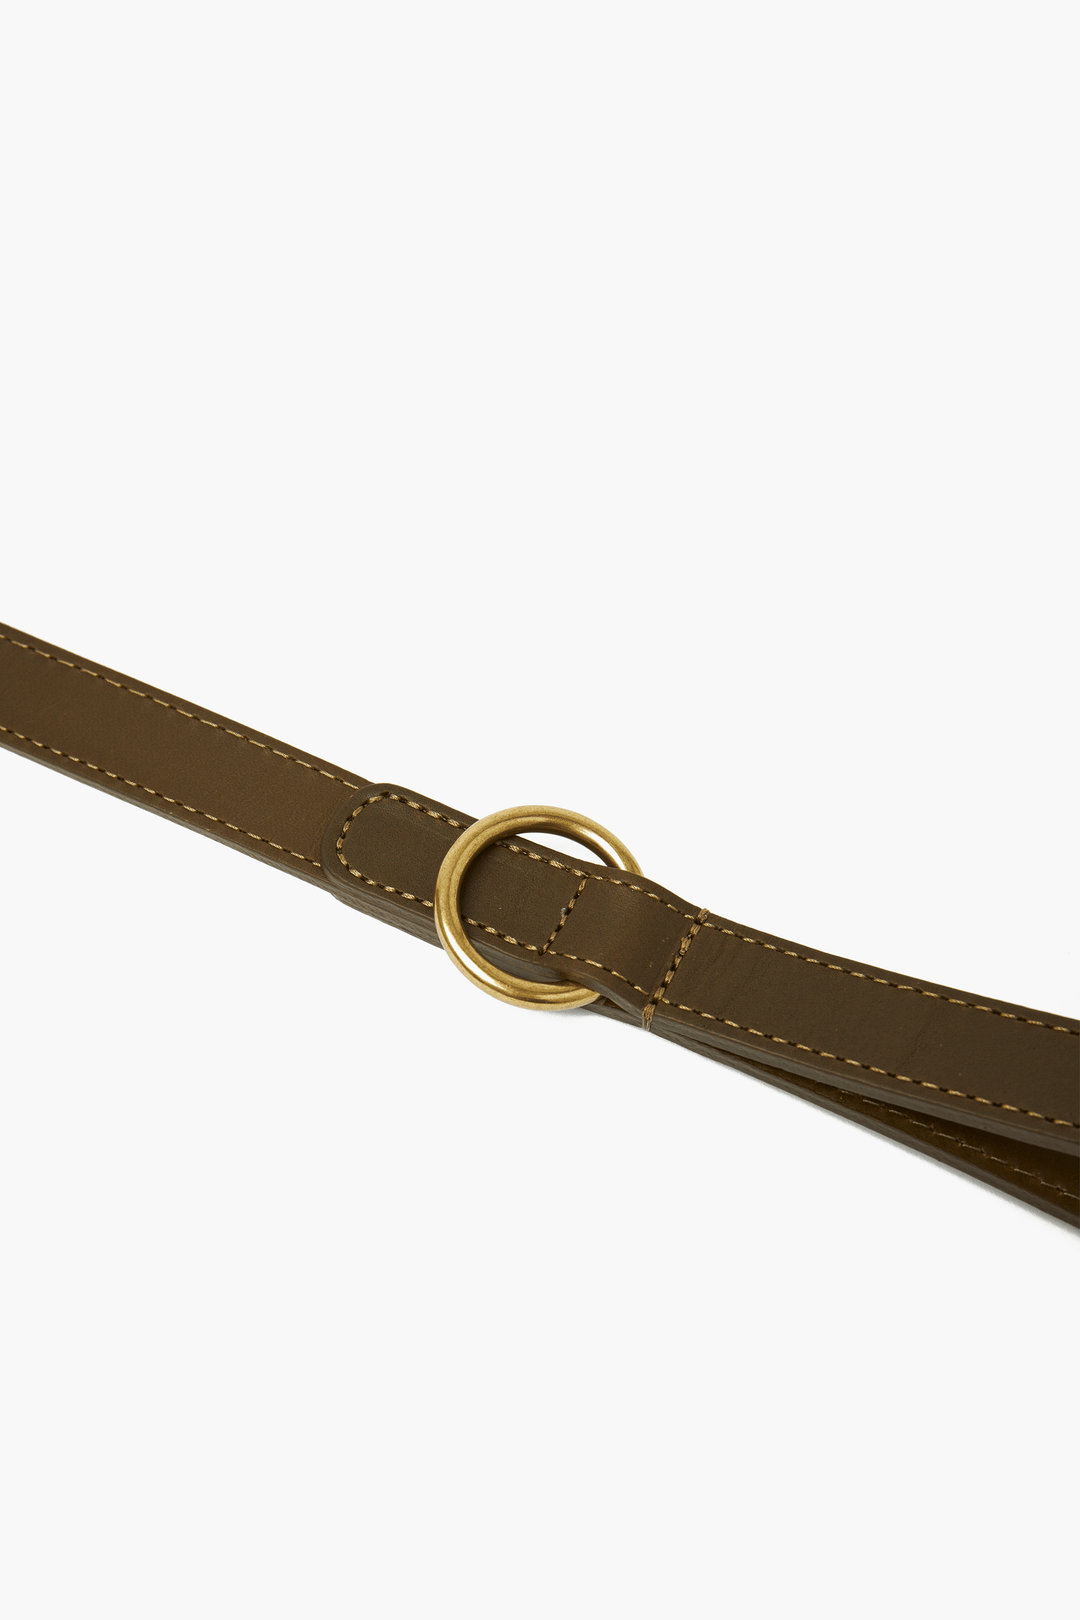 Hand-Stitched Premium Leather Dog Lead in Khaki Green with Brass Hardware